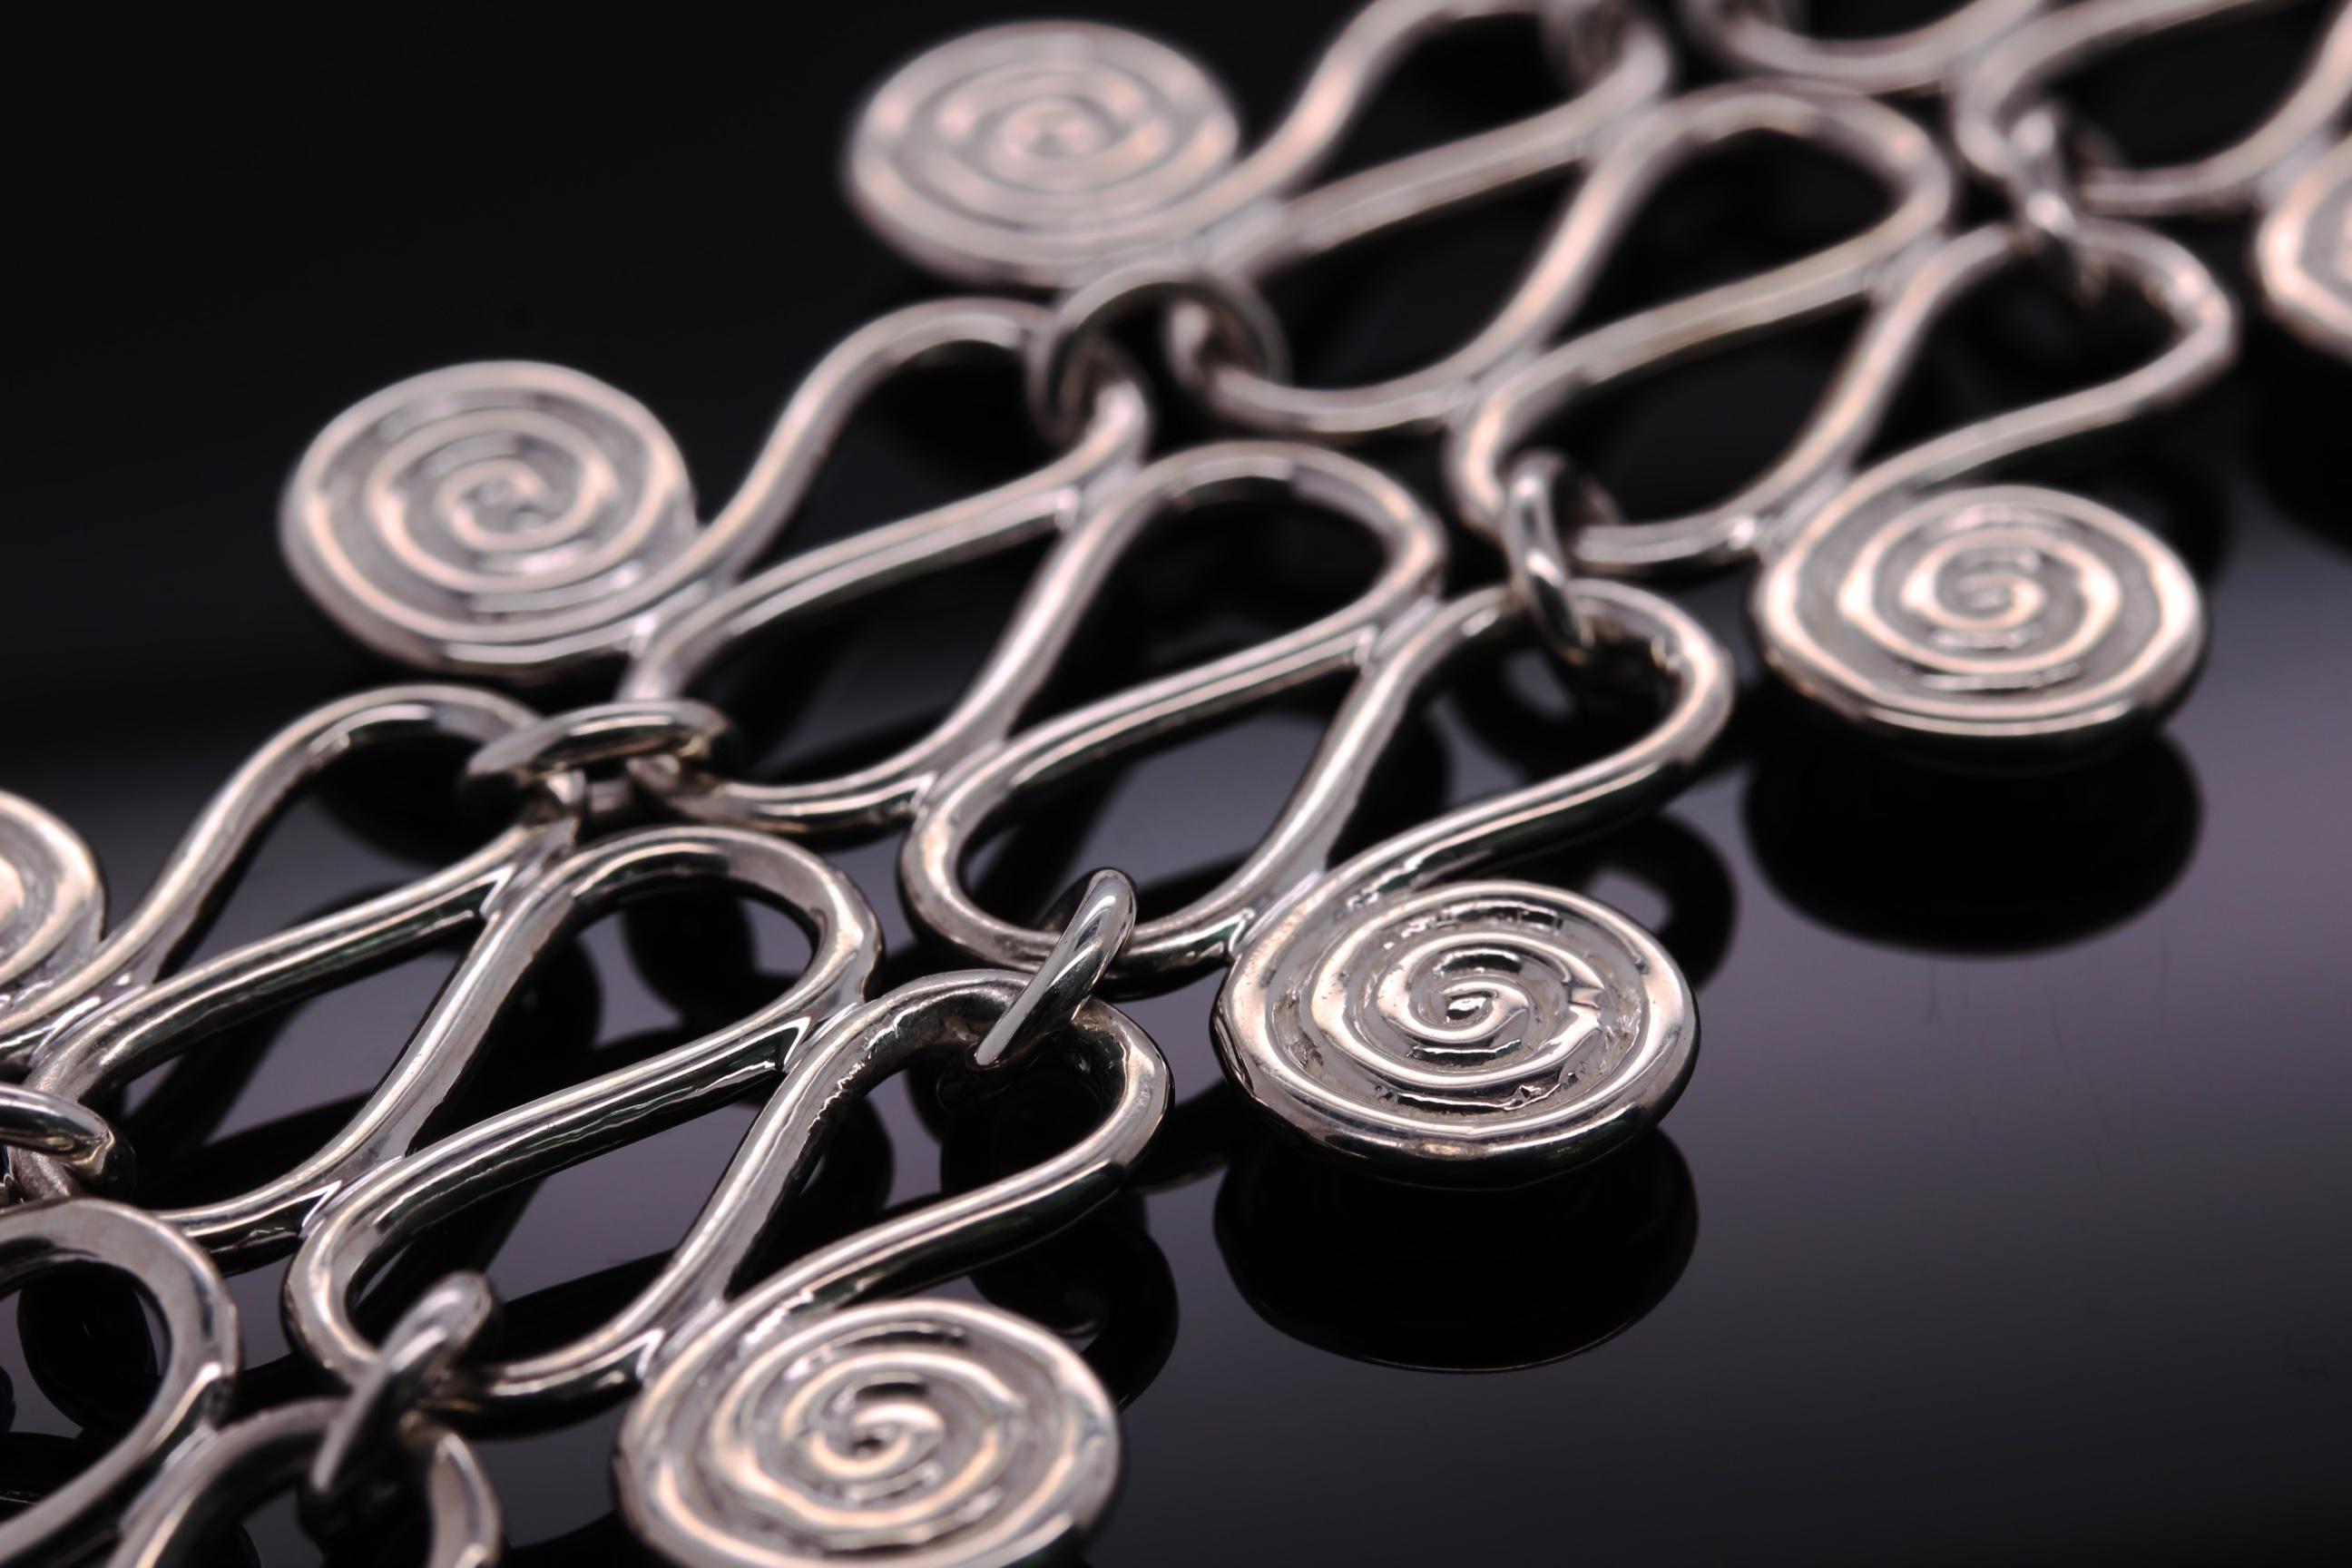 Castellani’s Prehistoric bracelet is designed using the Ancient motif of concentric circles. Many Ancient civilizations created jewellery using this spiral of metal. In the circa 1860’s Castellani created this bracelet that now is on exhibit at the